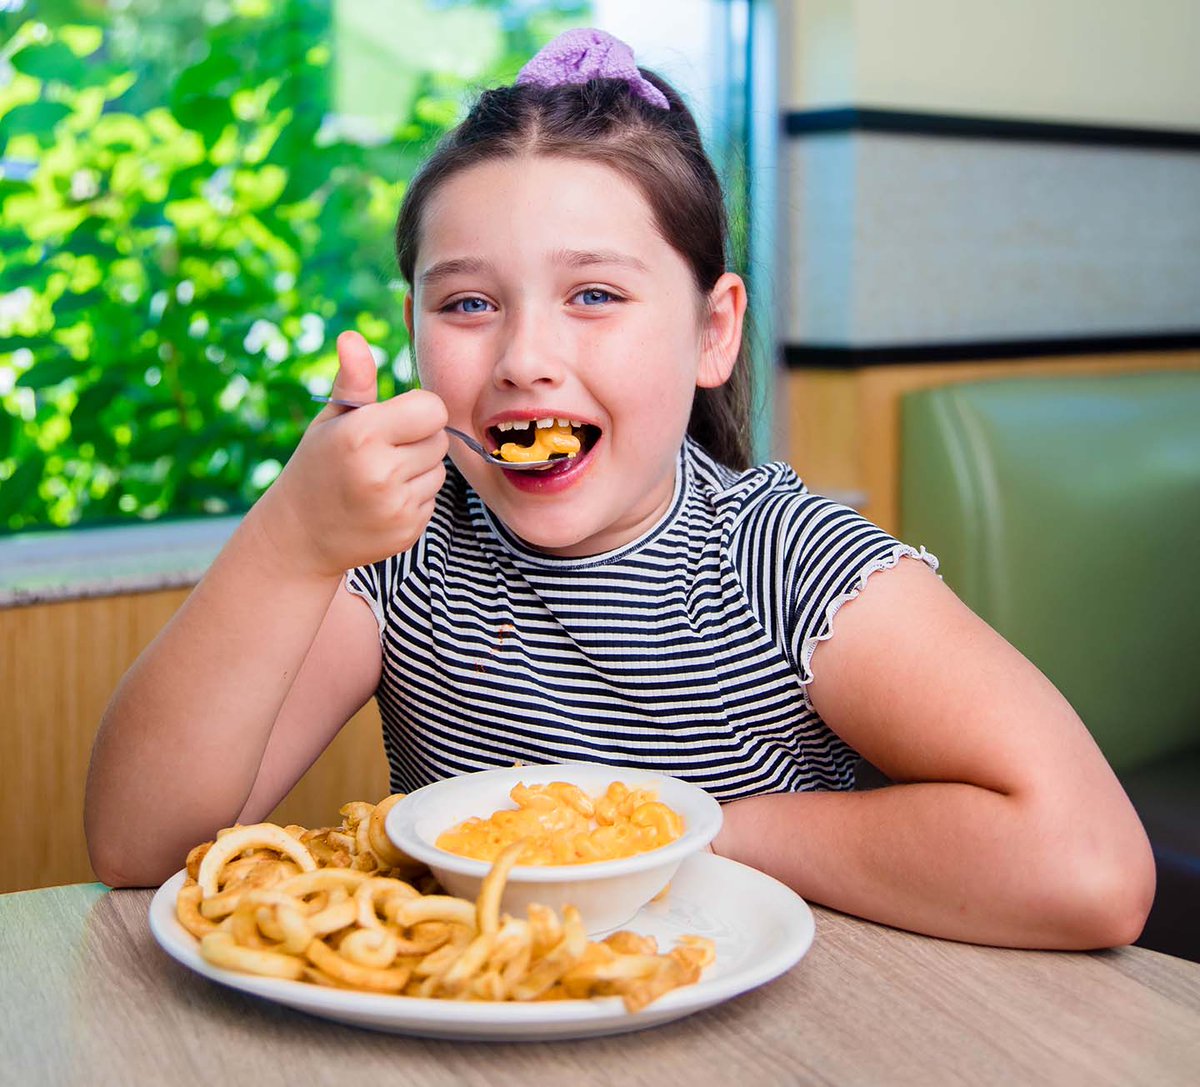 Olga's makes it easy to enjoy family time: KIDS EAT FREE every Sunday. Enjoy a free kids meal of an Olga, a side and a beverage 🌯🍟🥤 with any adult entree purchase. #FamilyFun #KidsEatFree #SundayVibes Find your nearest Olga's location here: olgas.com/store-locator/